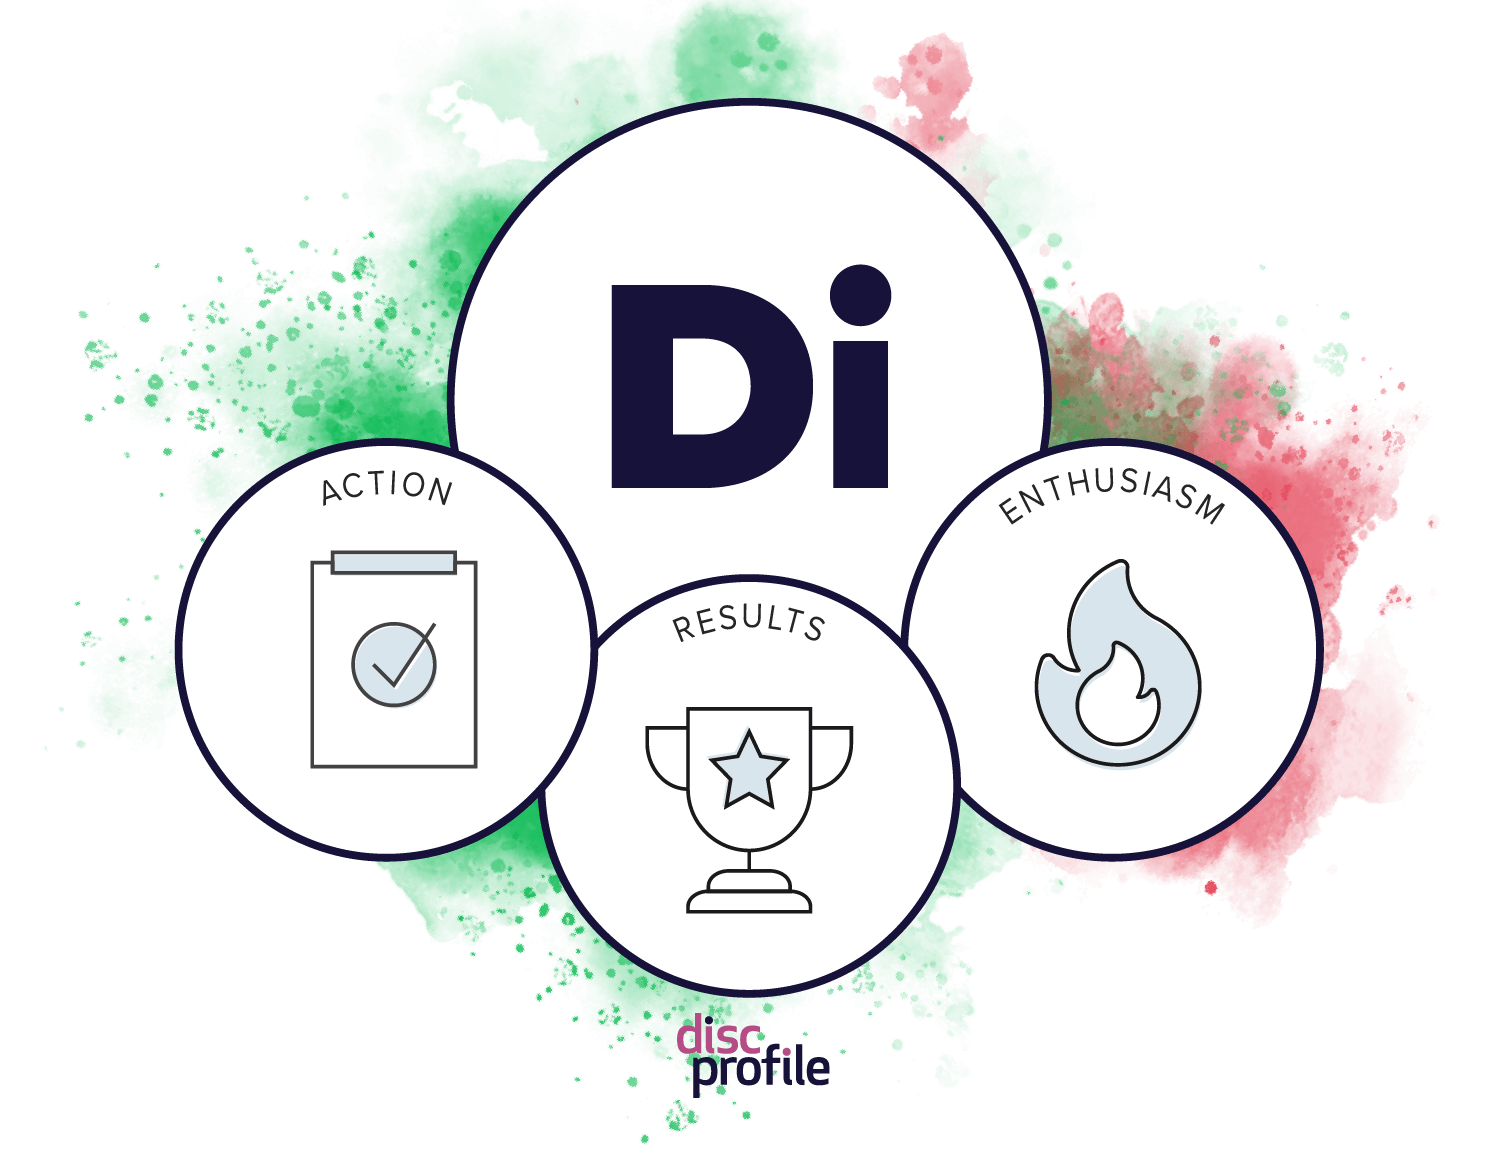 Di style graphic with priorities: action, results, enthusiasm